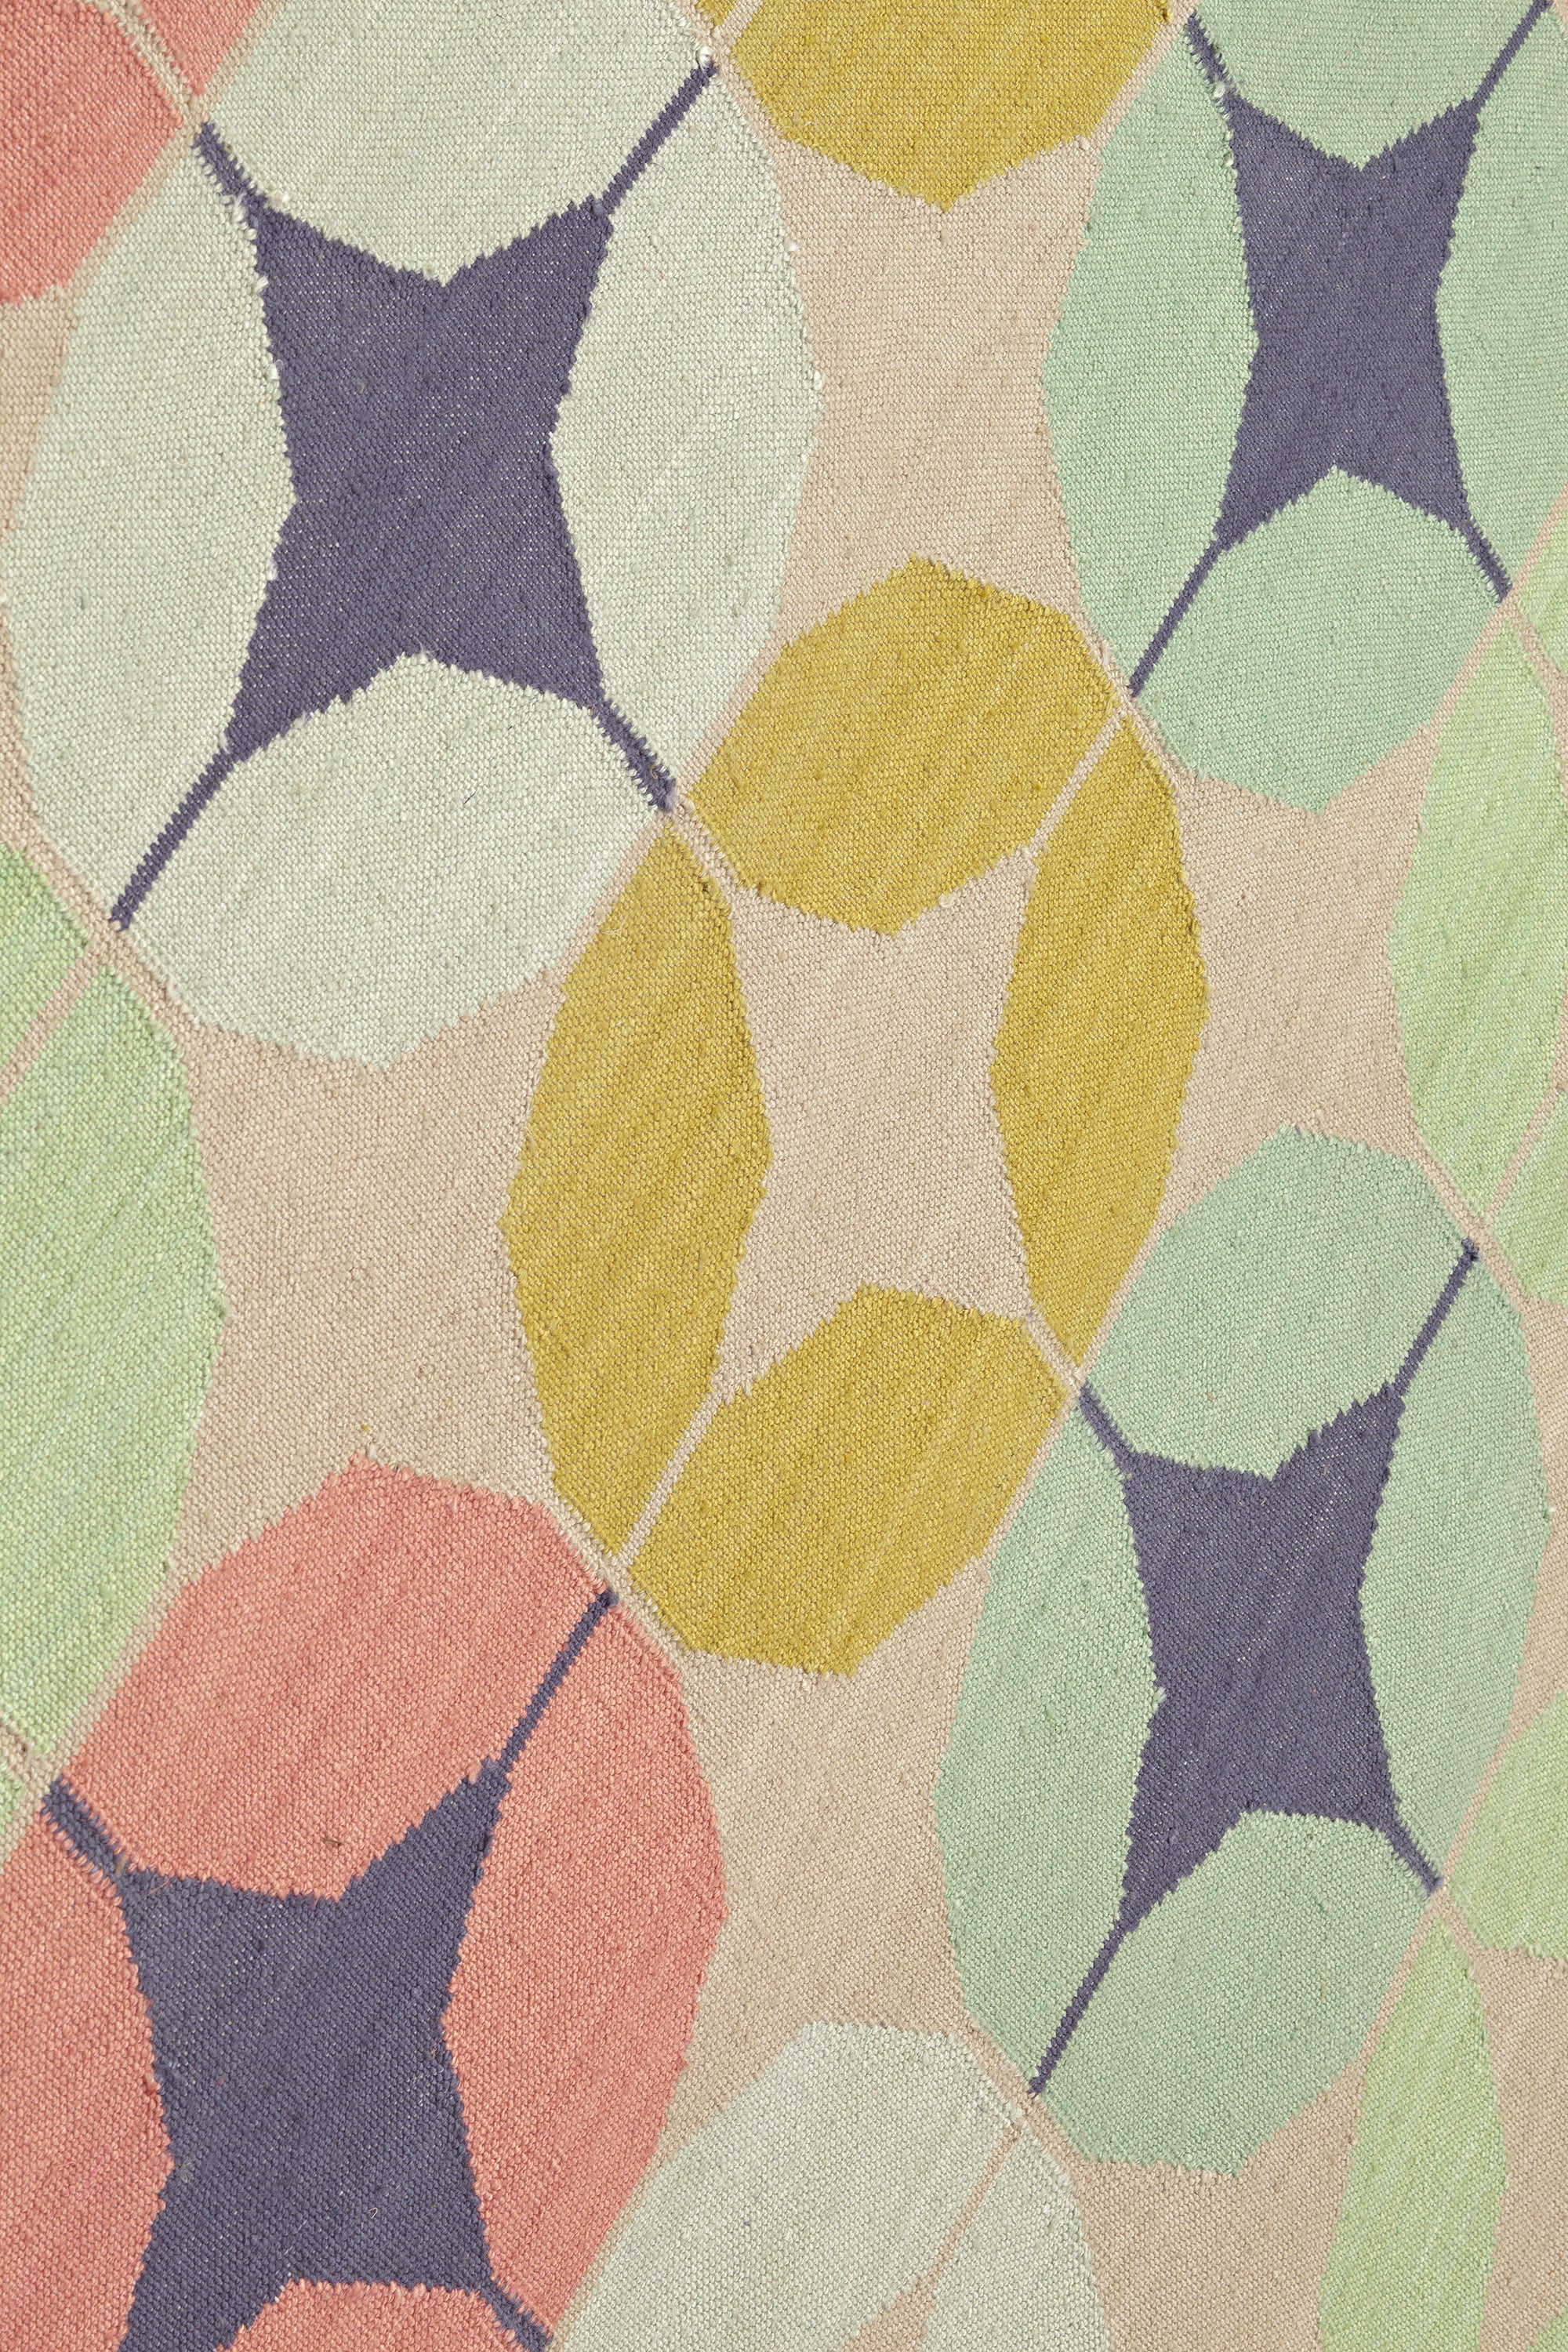 Detail of Alhambra Rug in Venetia featuring pattern of linked circles that create a star like lattice in a range of coral, mustard tyellow, seafoam green, pale green and royal purple accents on a tan field. 